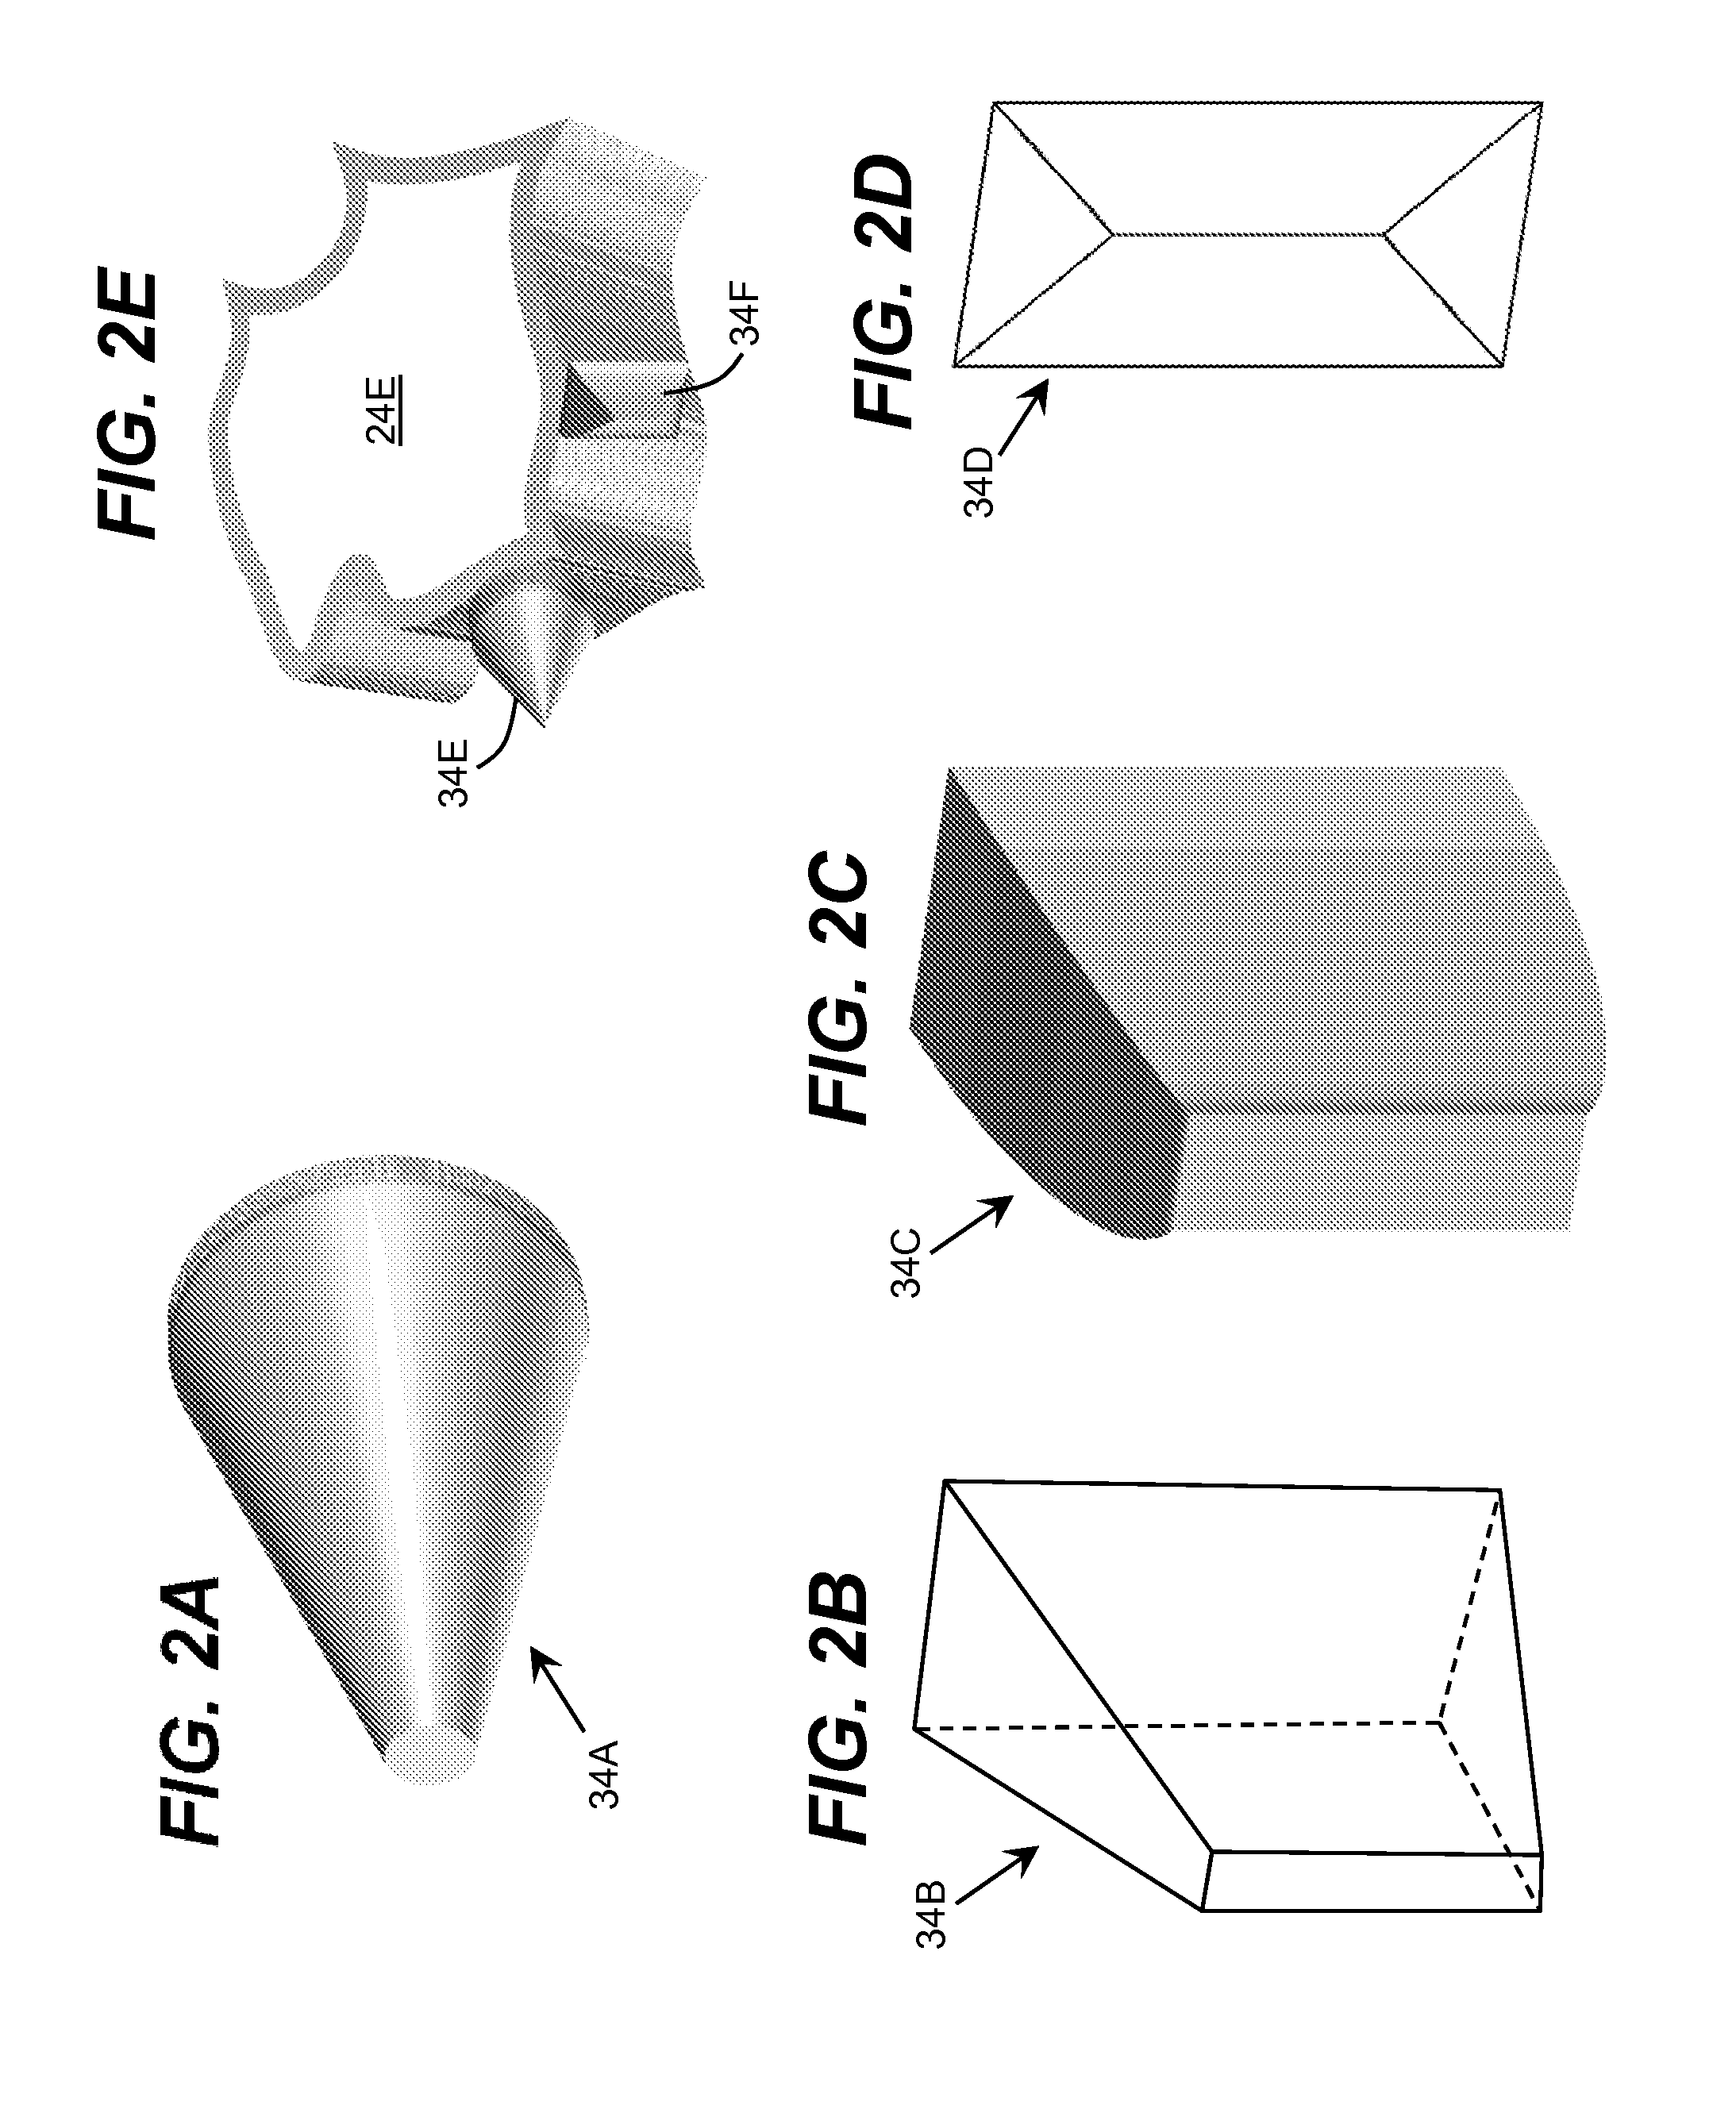 Ohmic Contact to Semiconductor Layer